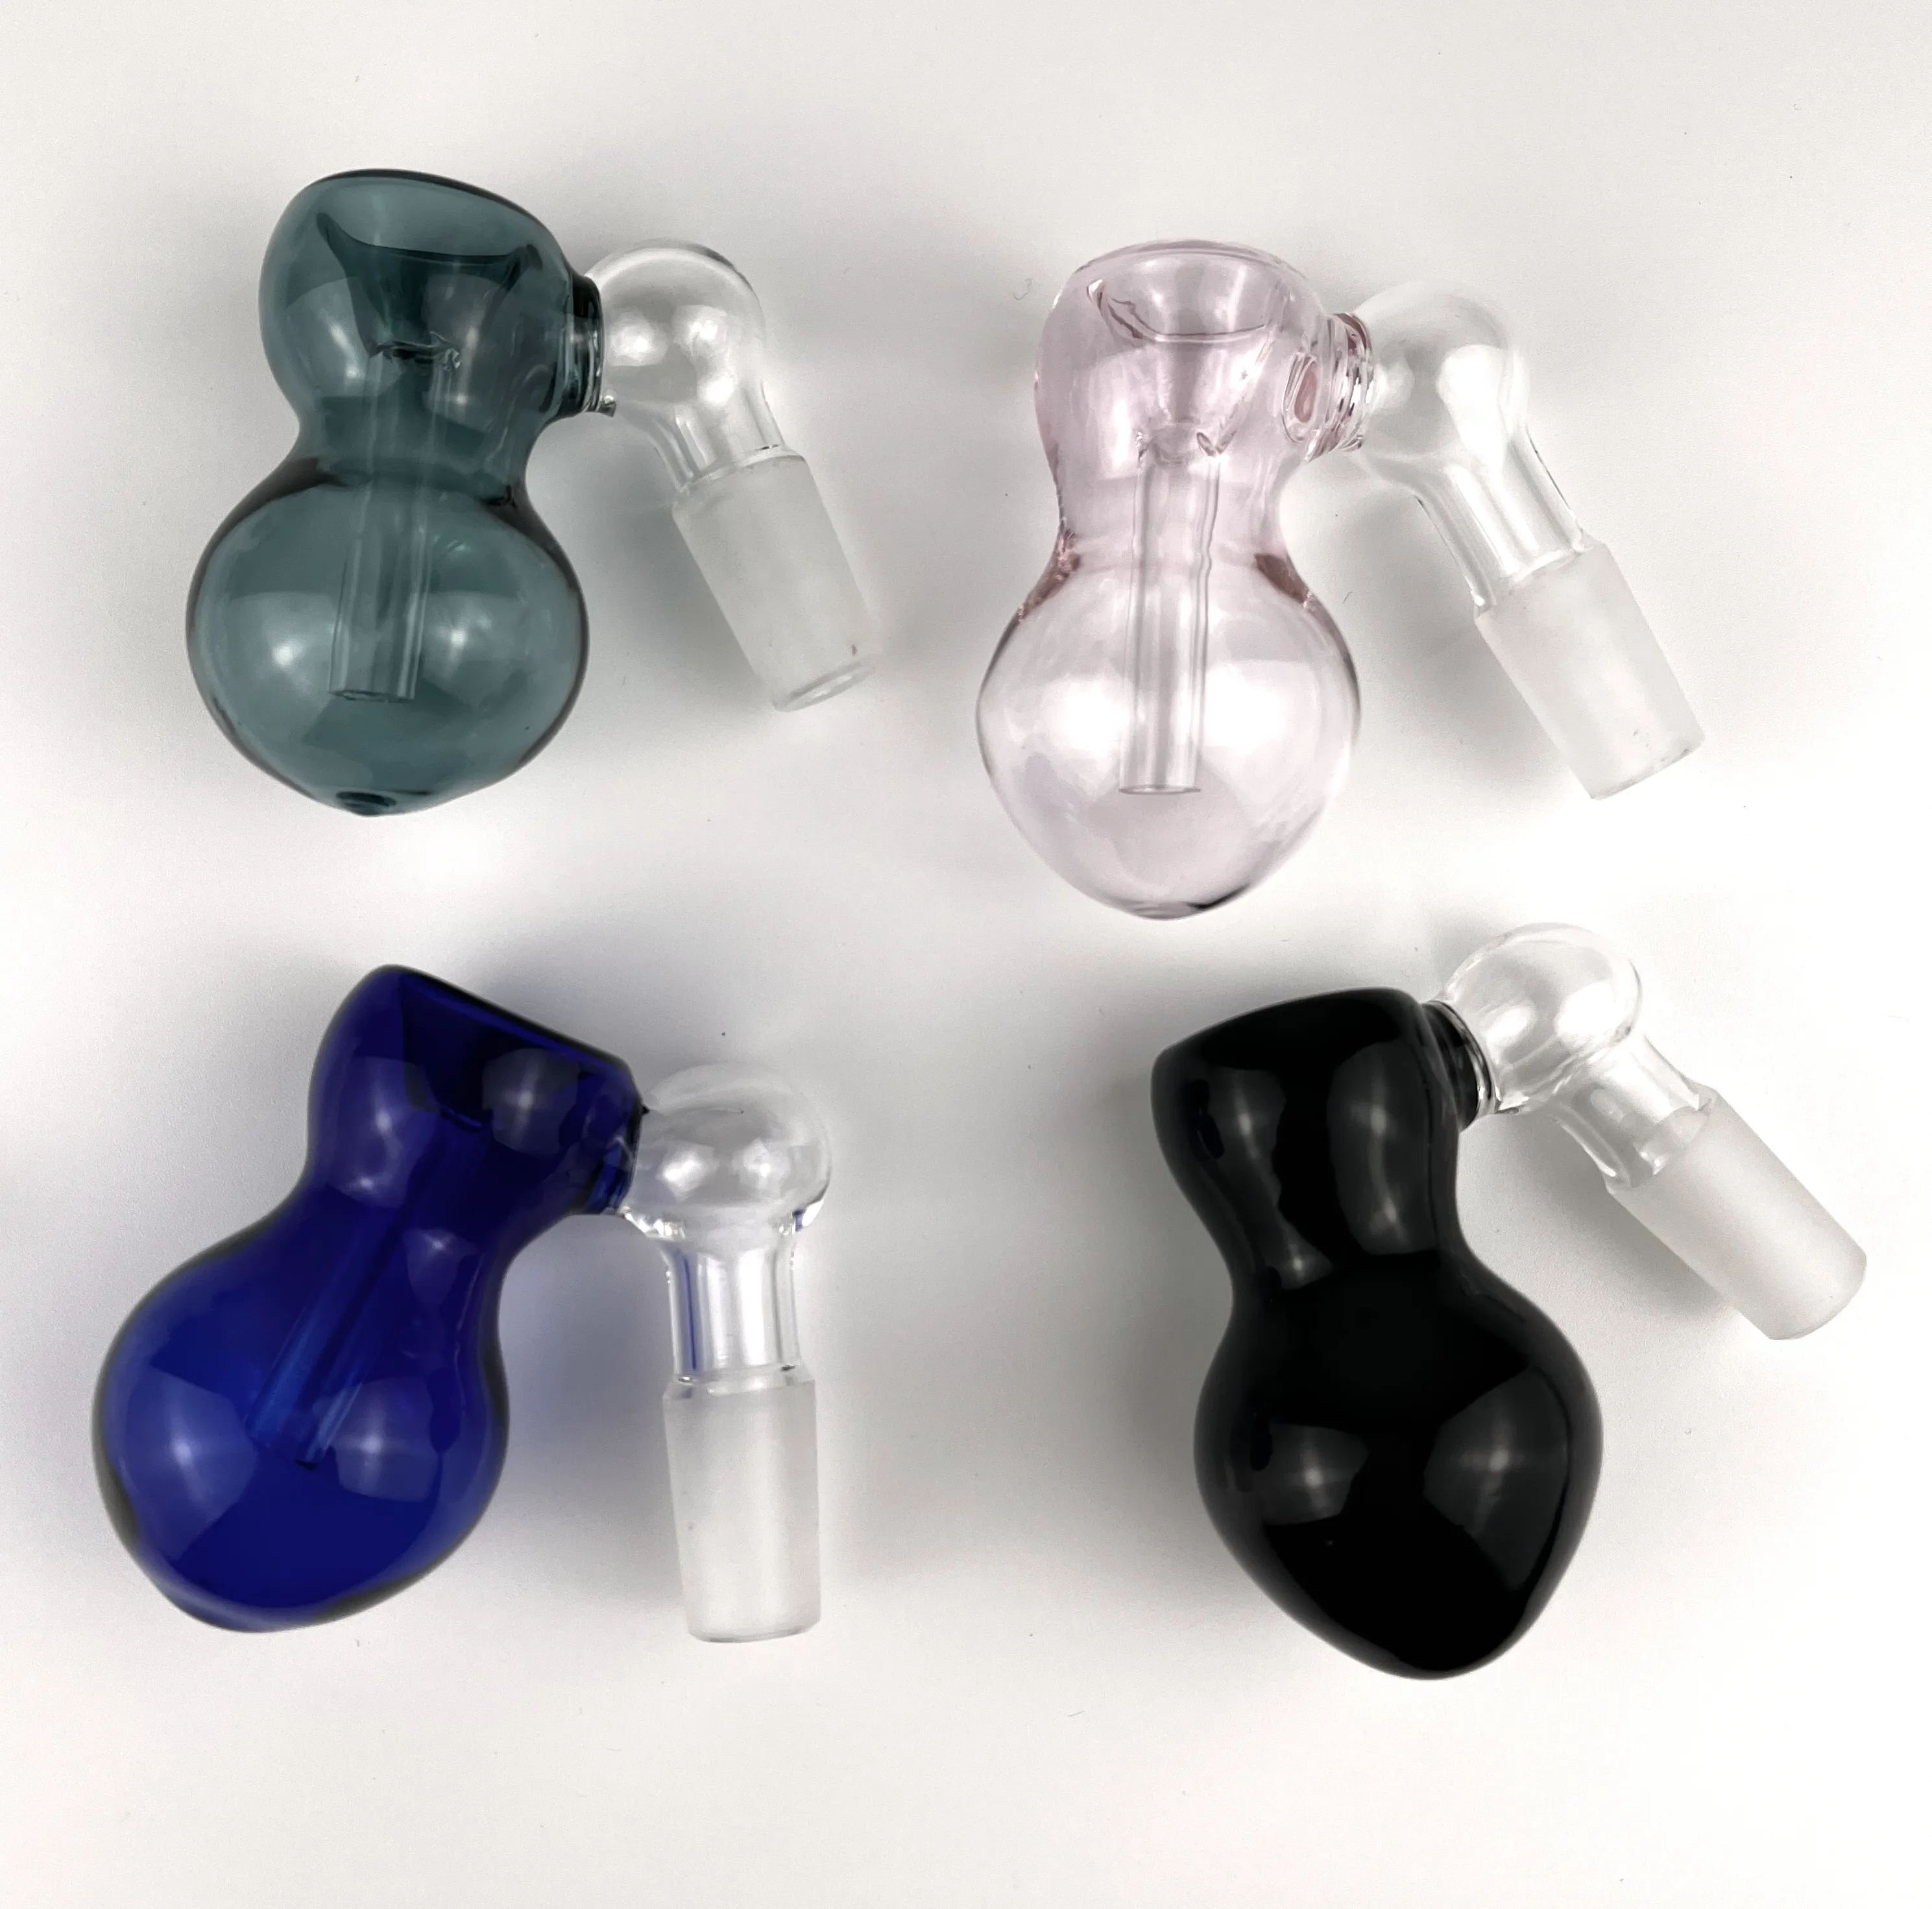 Color Glass Ash Catcher Bowl Bubbler For Smoking Pipes Calabash Ashcatcher Bowls Gourd Percolator Water Bongs Dab Rigs